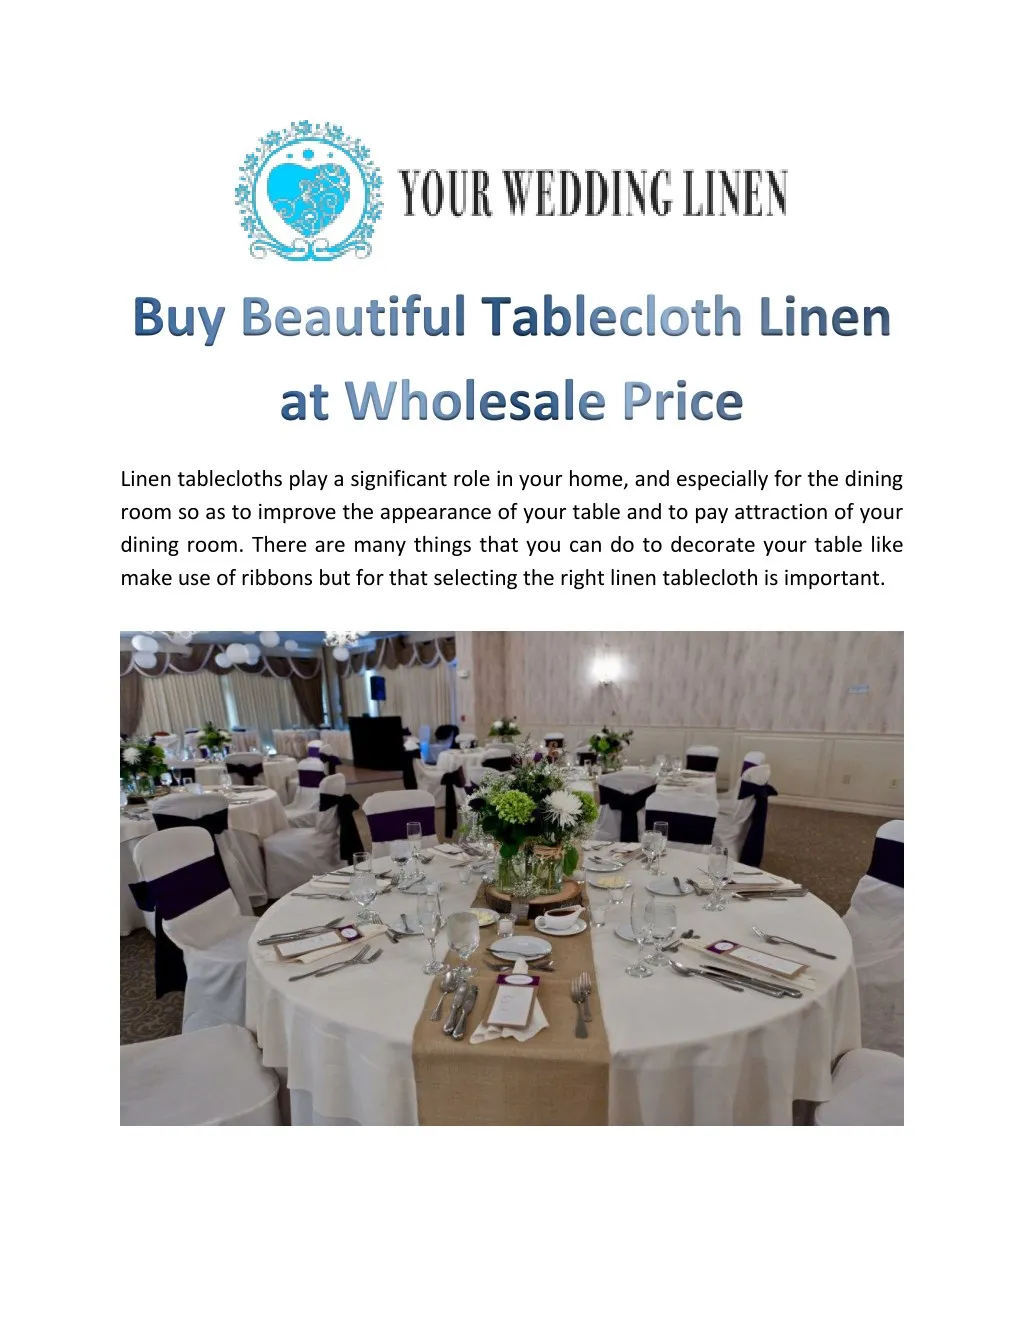 linen tablecloths play a significant role in your